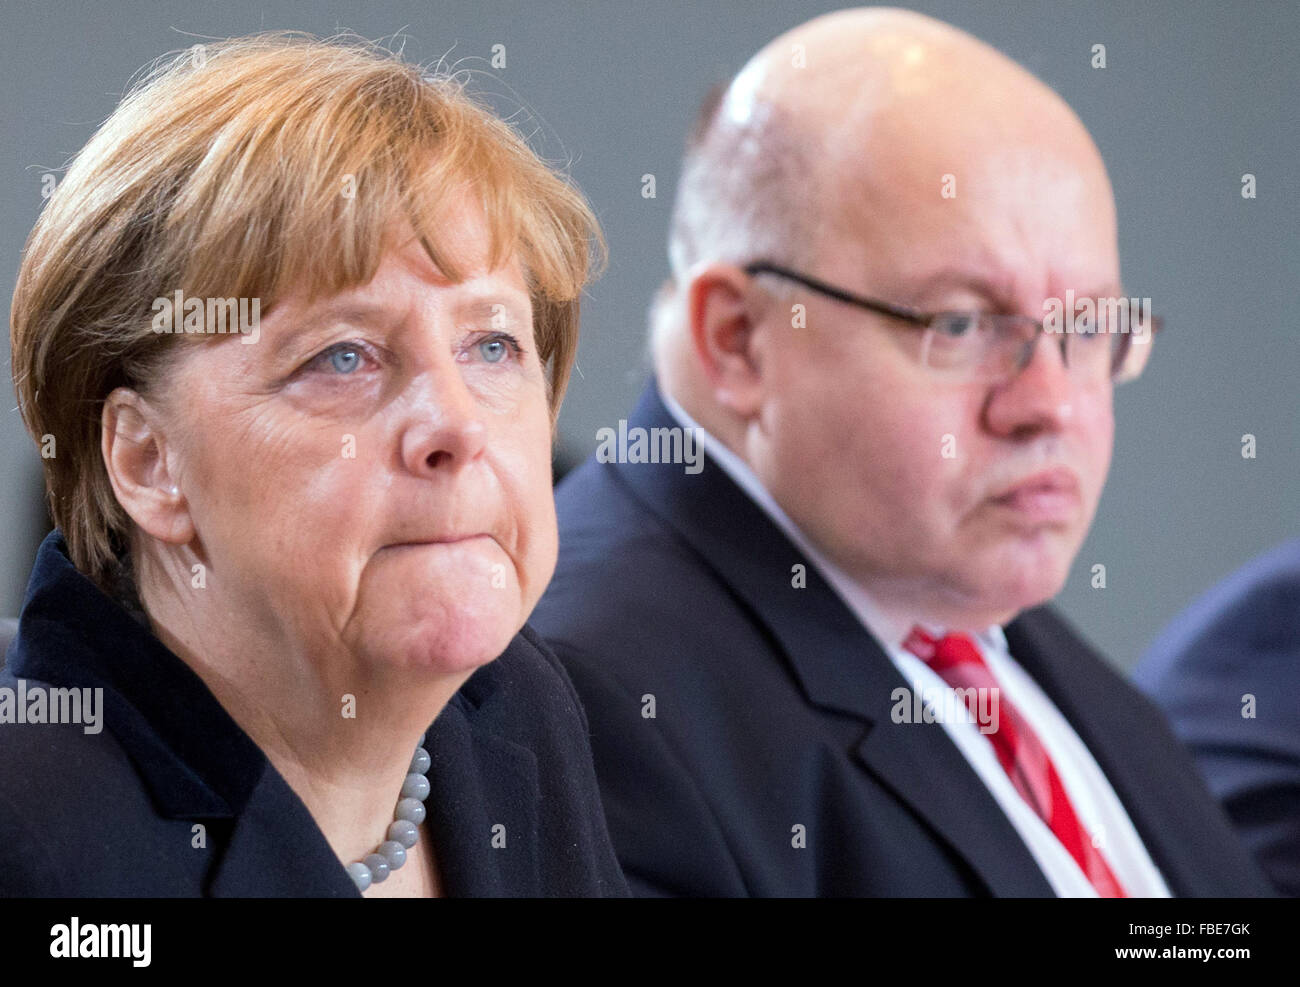 German Chancellor Angela Merkel and Peter Altmaier, Chief of Staff of the German Chancellery, attend the federal cabinet meeting in the Federal Chancellery in Berlin, Germany, 13 January 2016. Photo: KAY NIETFELD/dpa Stock Photo